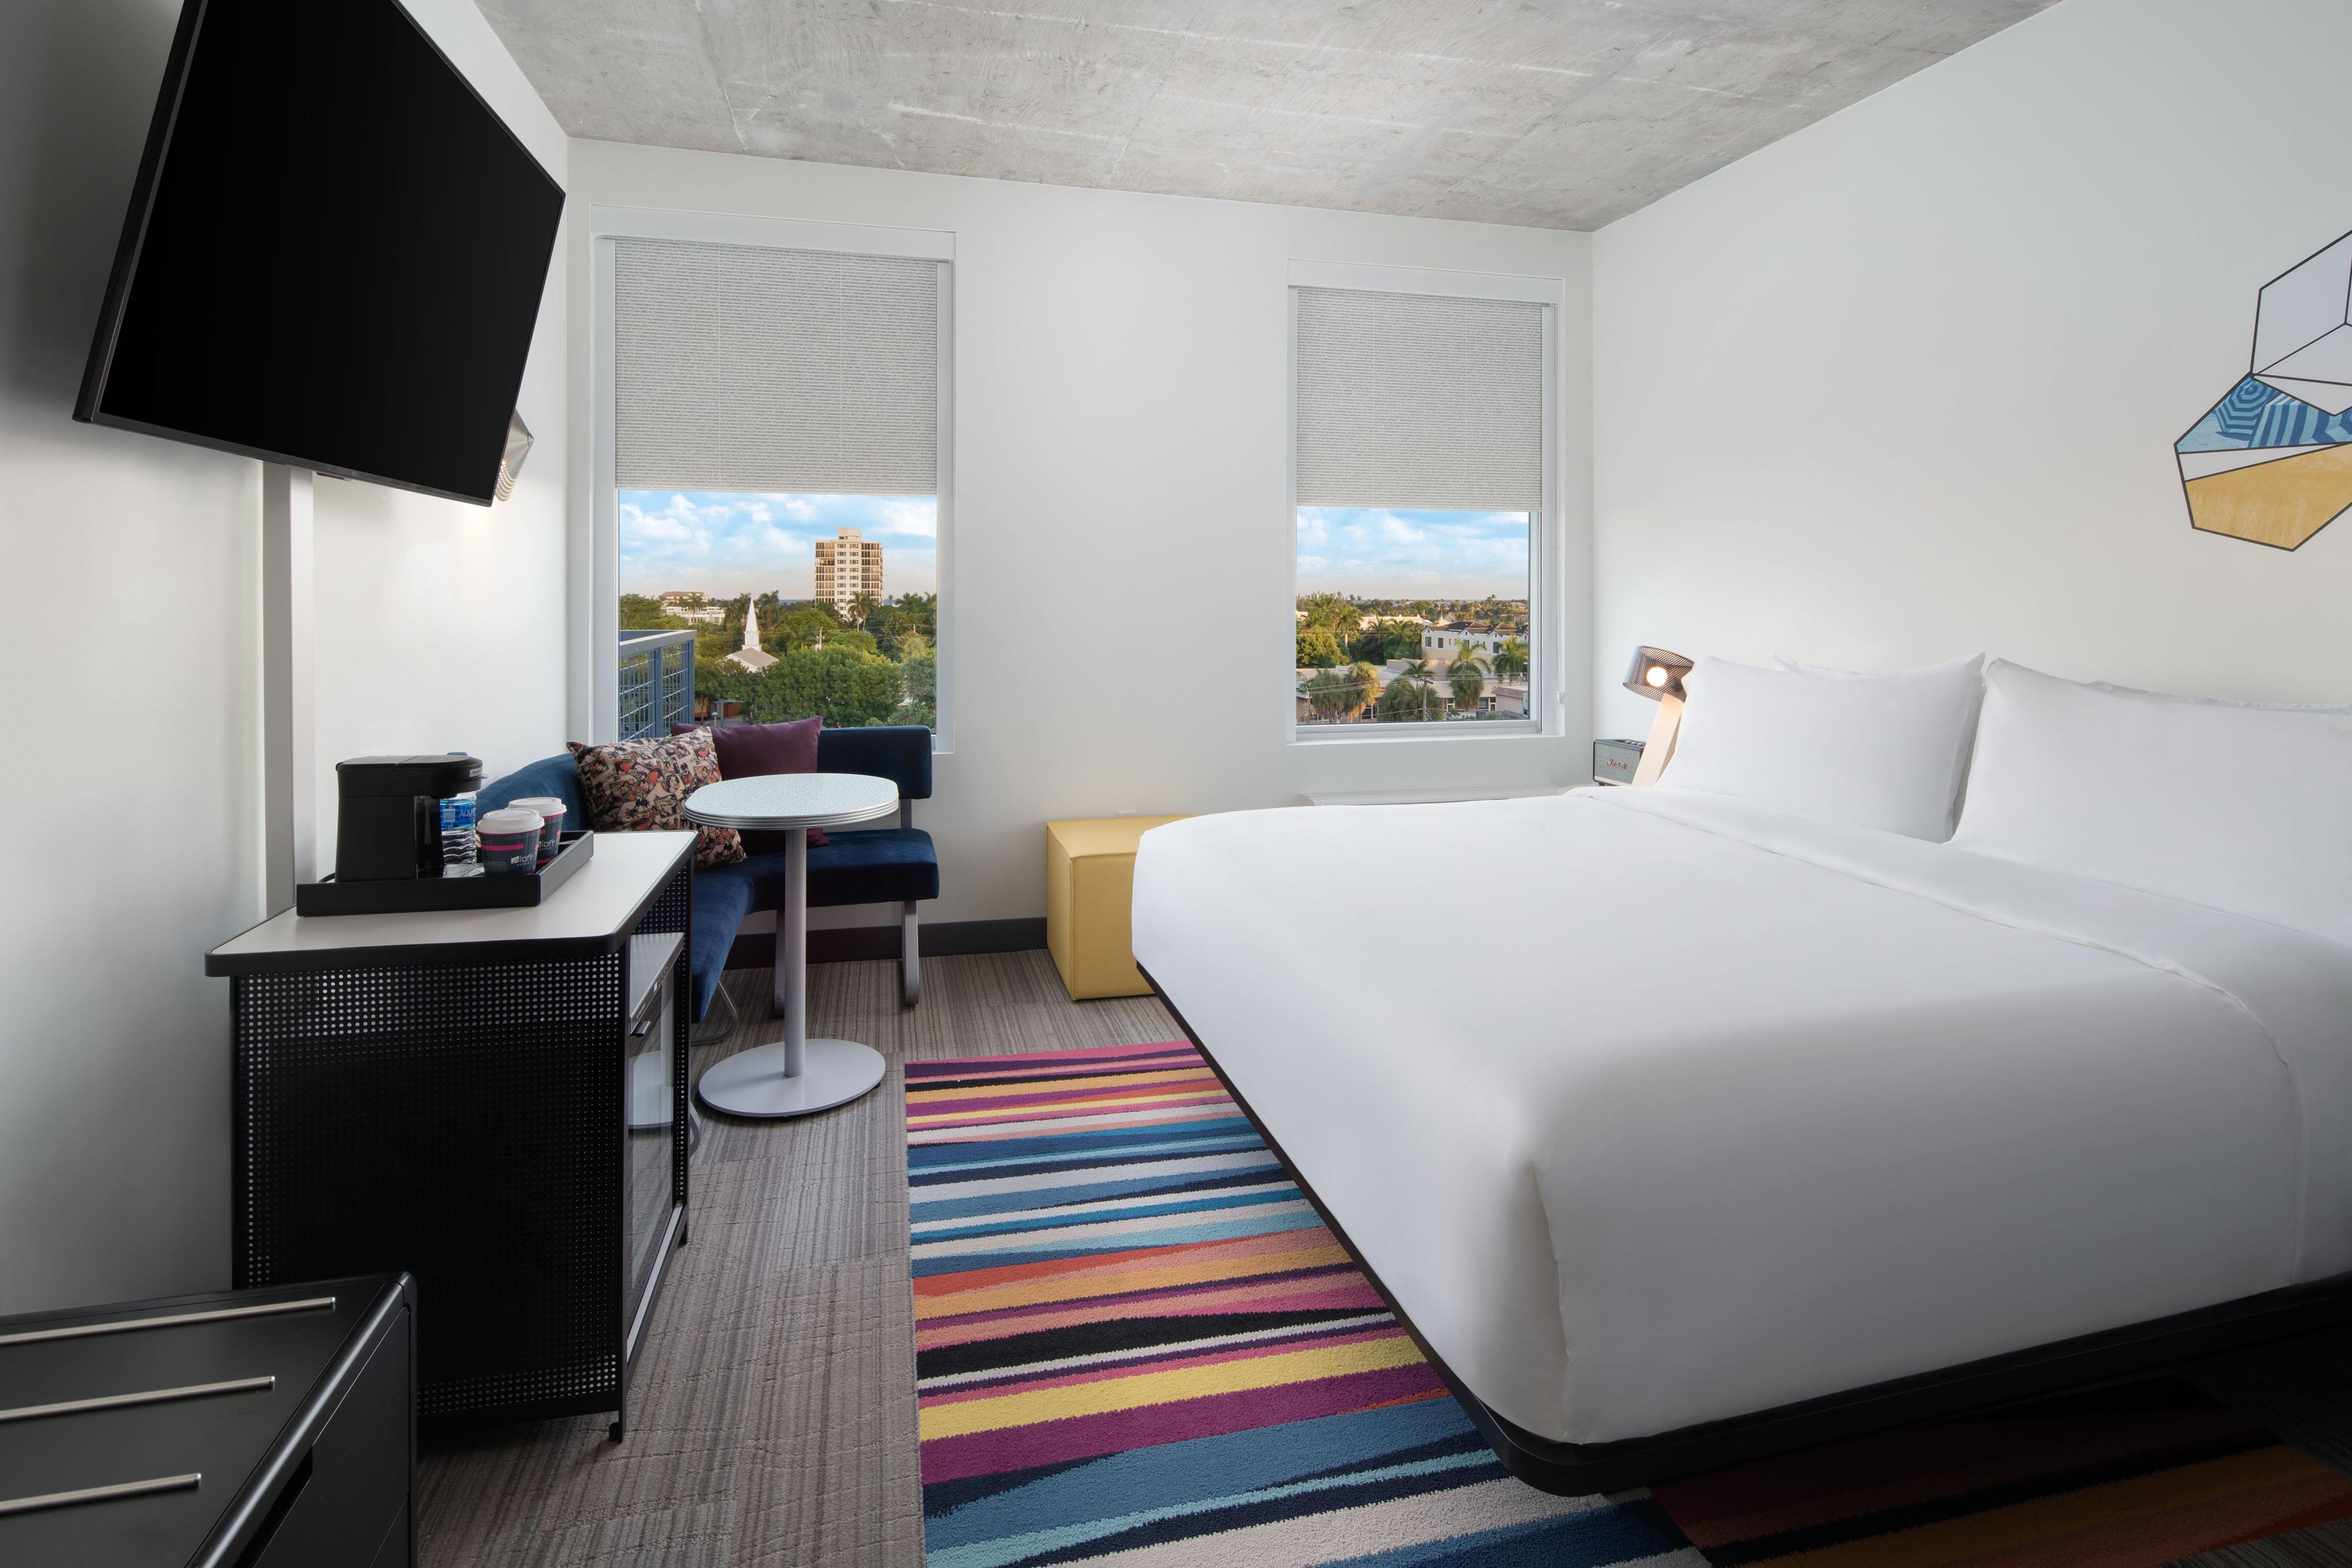 Surround yourself with remarkable city vistas in our king guest rooms, which are filled with natural light and include plush king beds, as well as vibrant dÃ©cor.